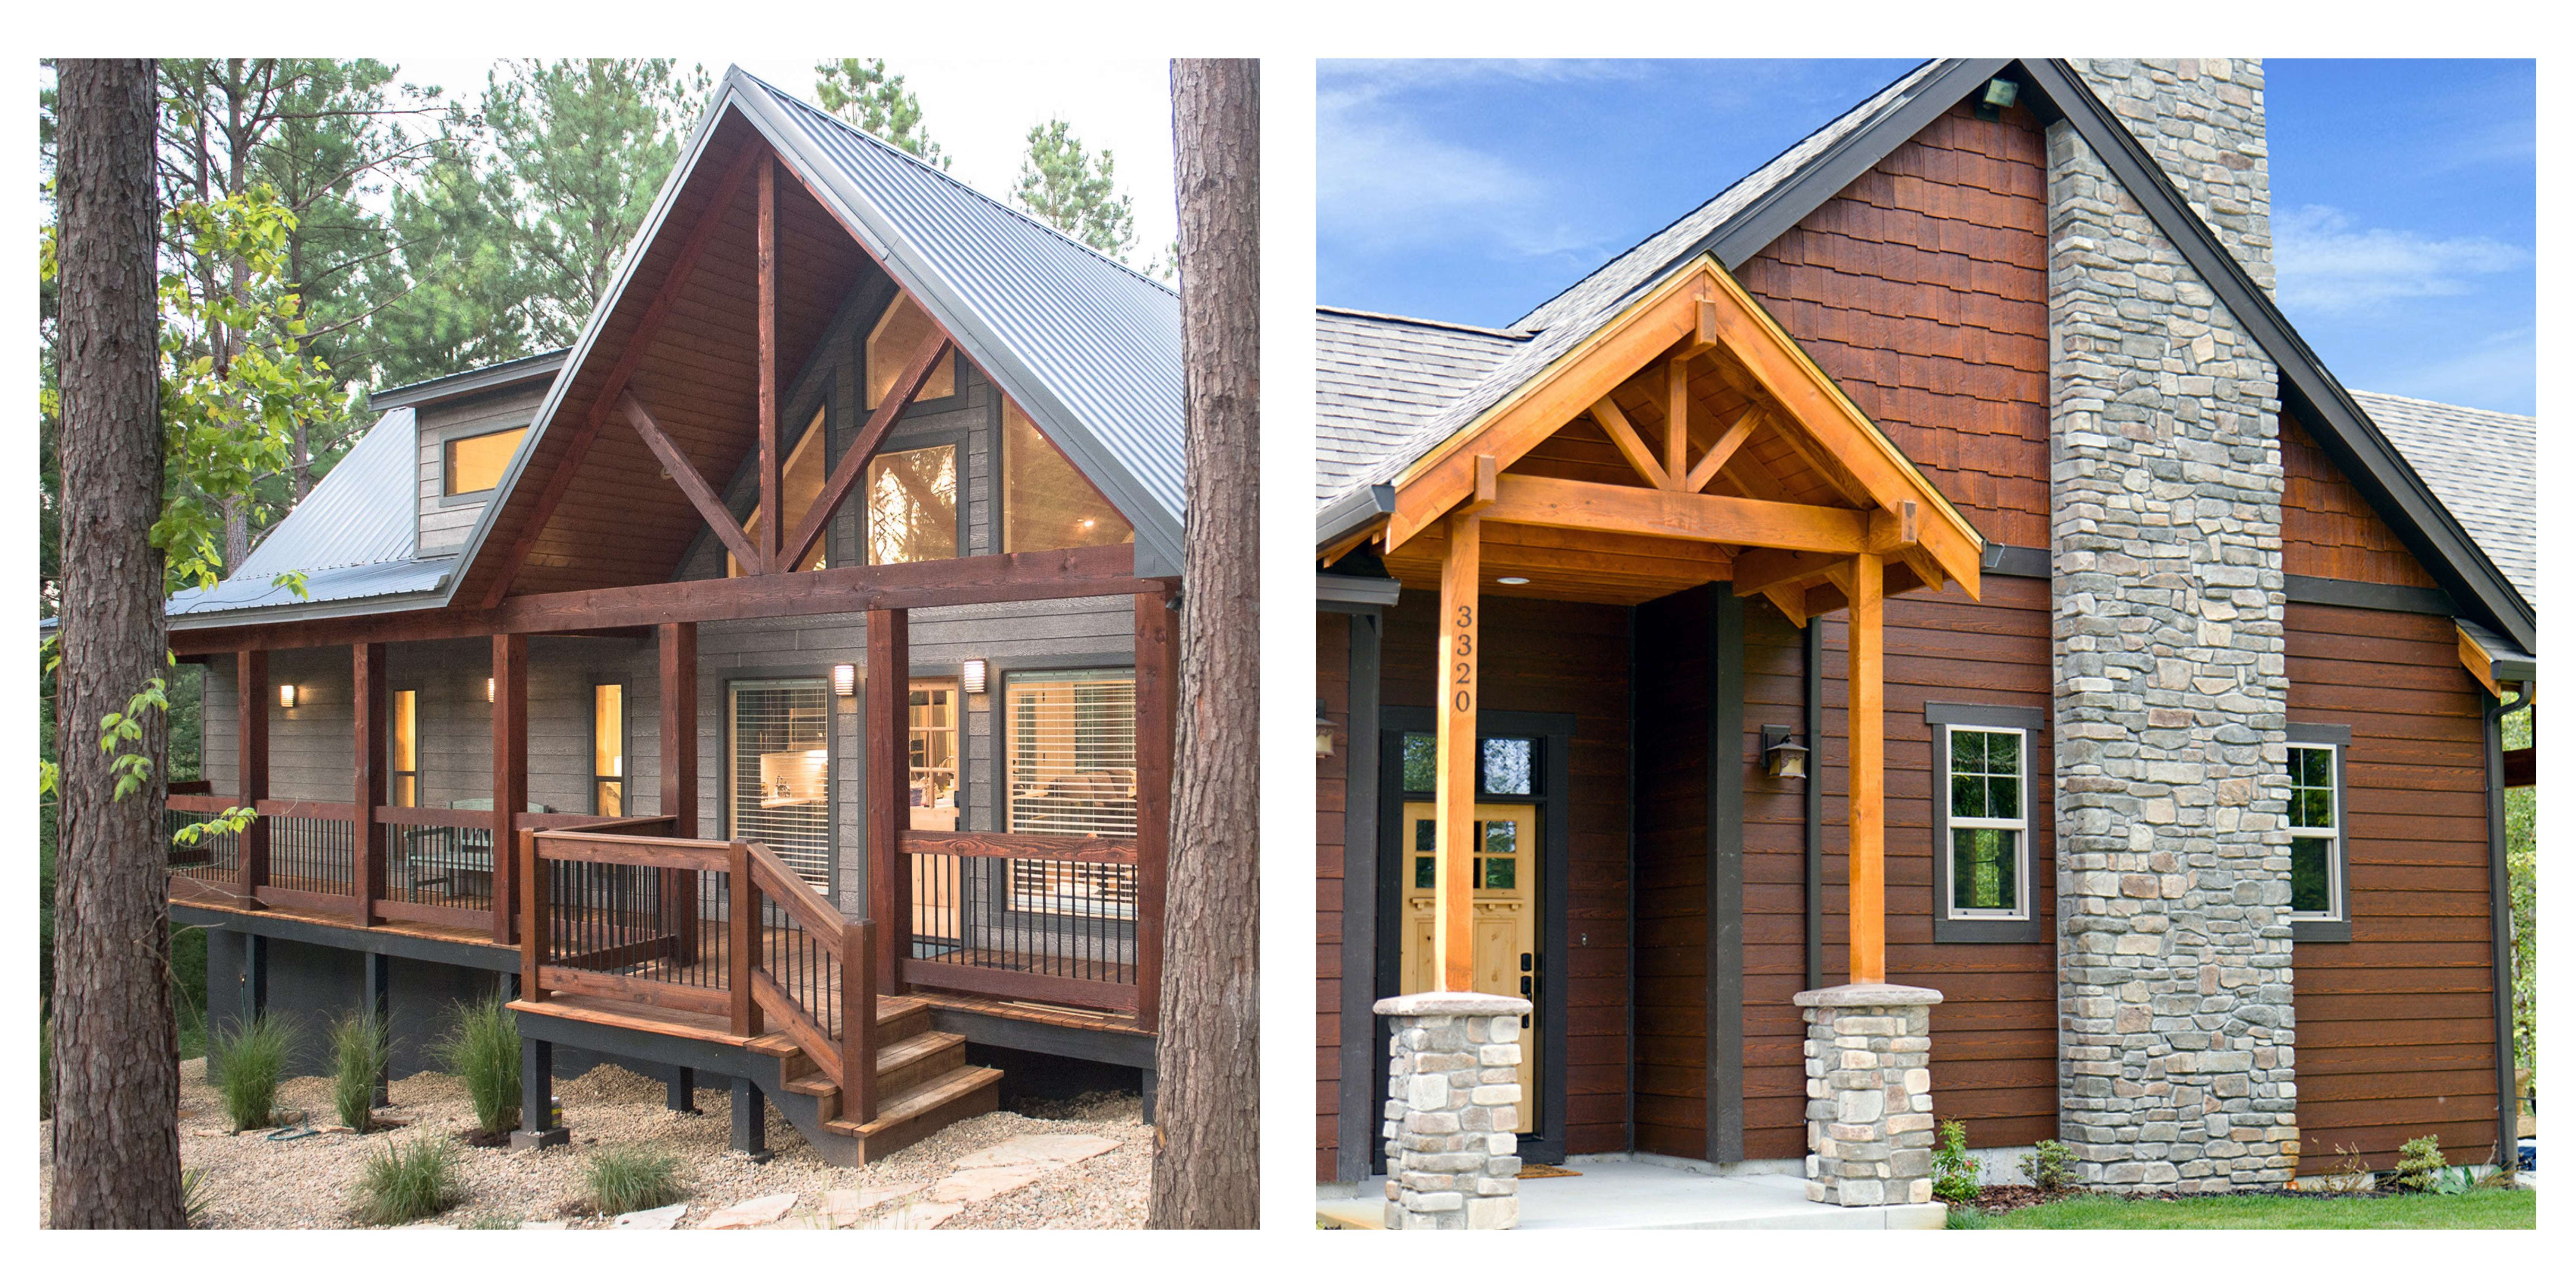 Glulam engineered wood products: Two front porches on a wood home with wood posts and wood beams.